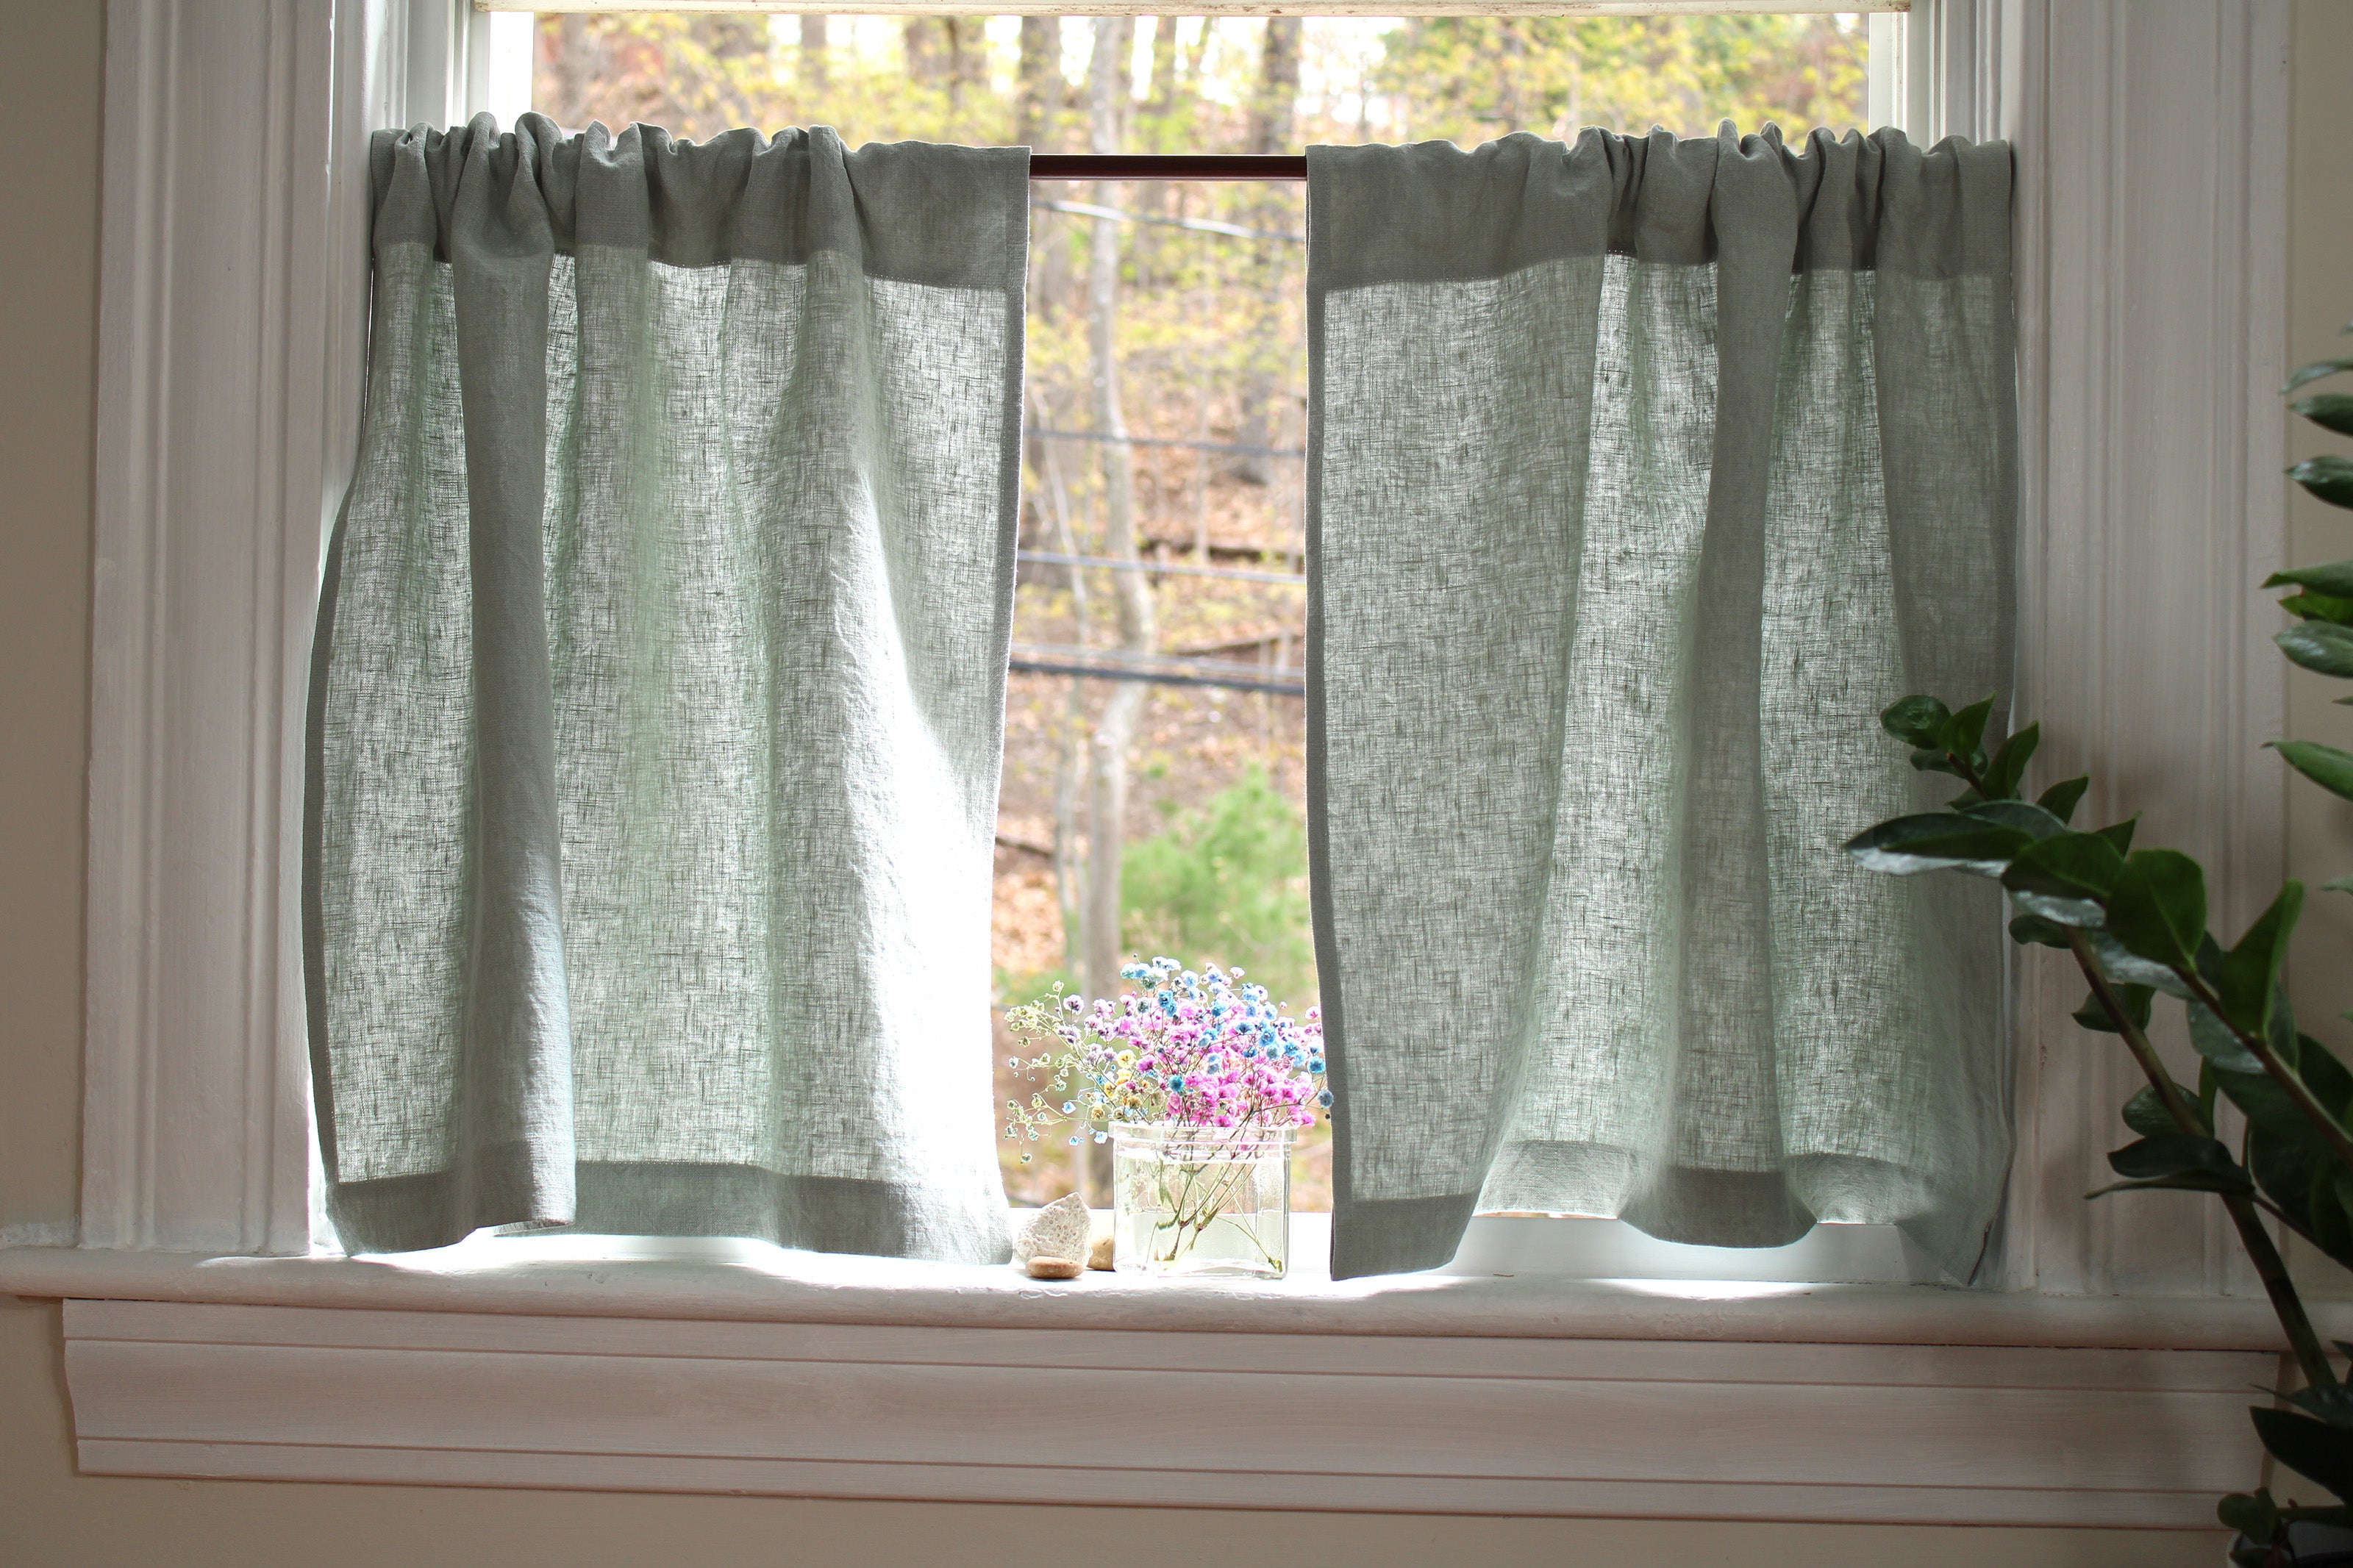 Best Heavy Linen Curtains / Washed Linen Curtains / Custom Curtains US